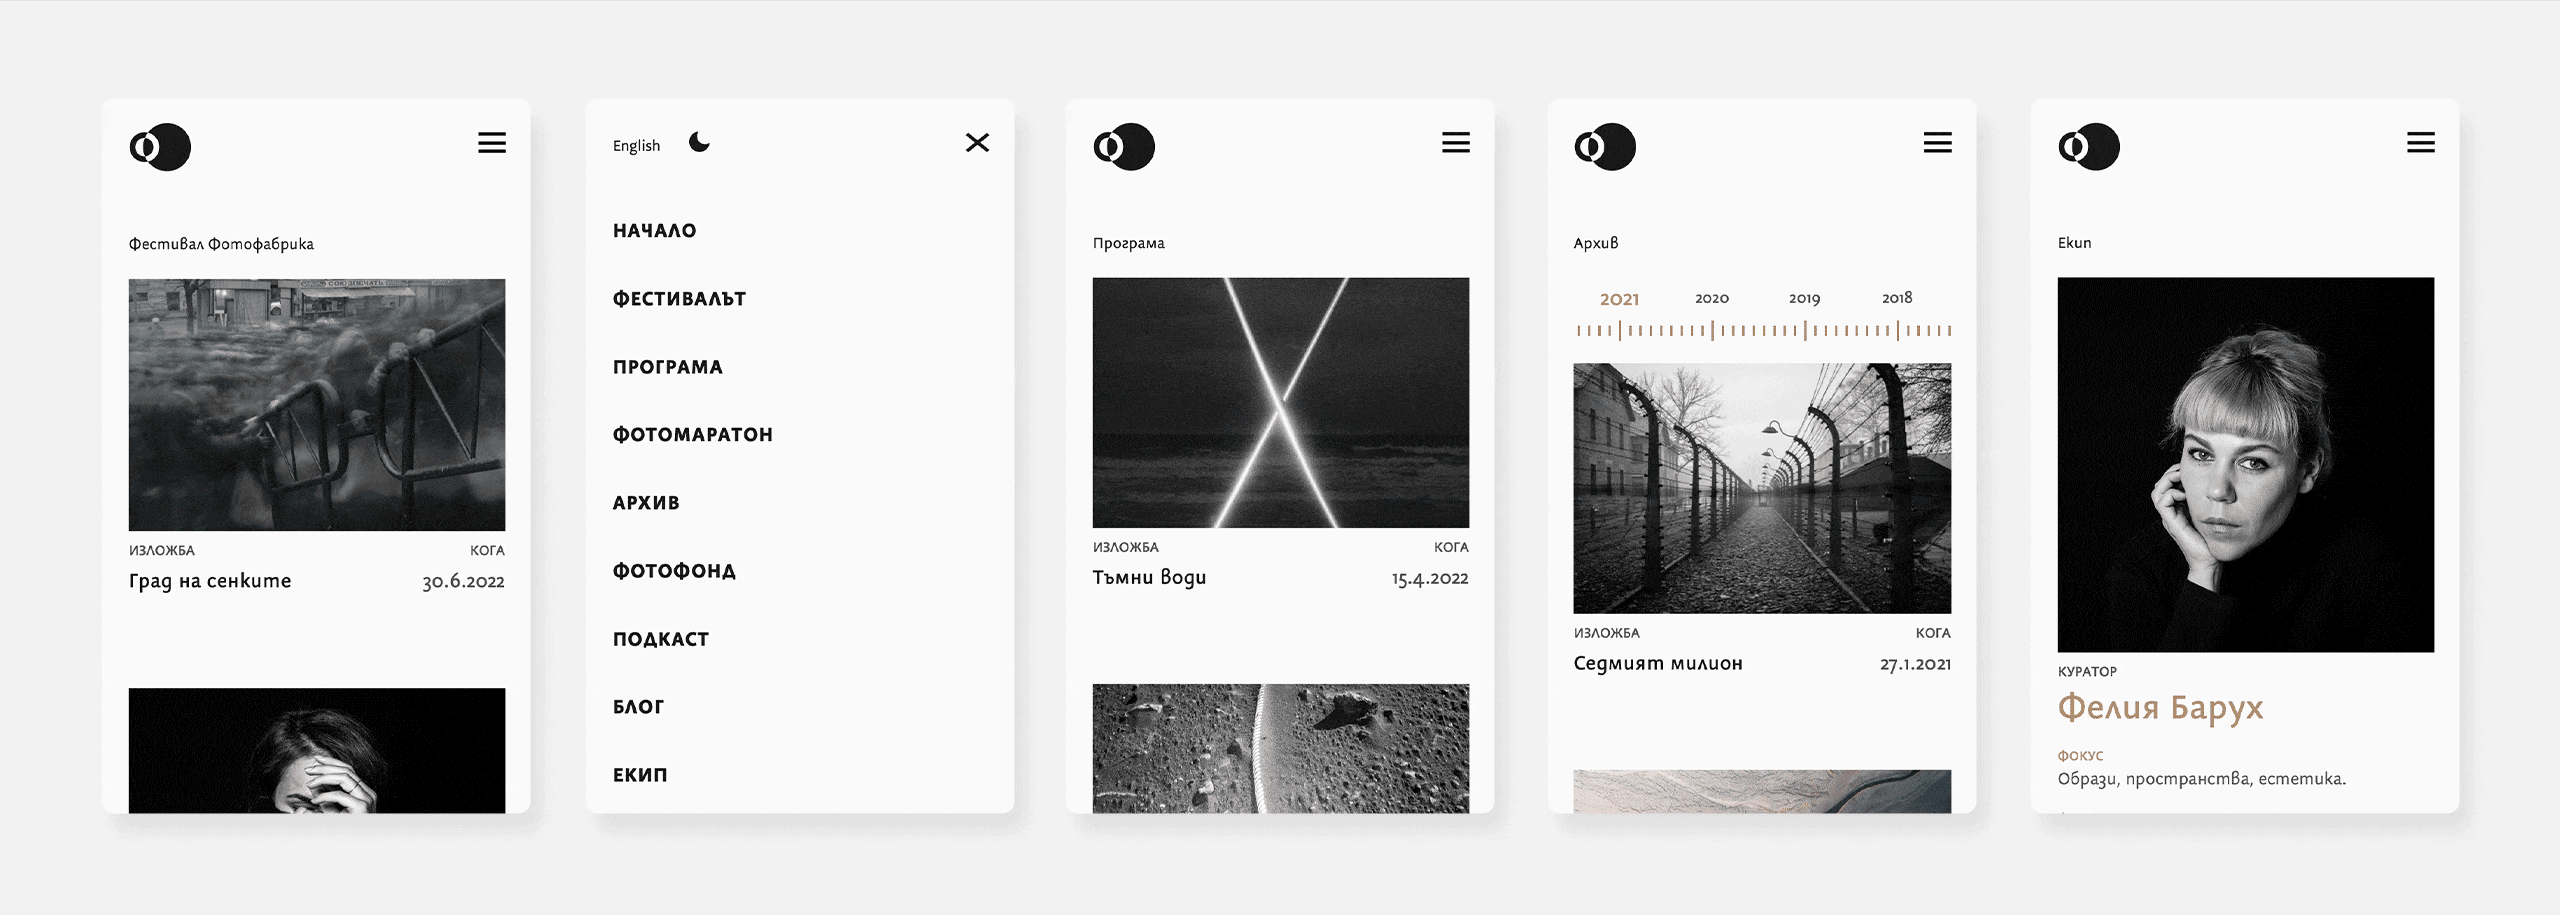 Fotofabrika website pages on mobile light theme